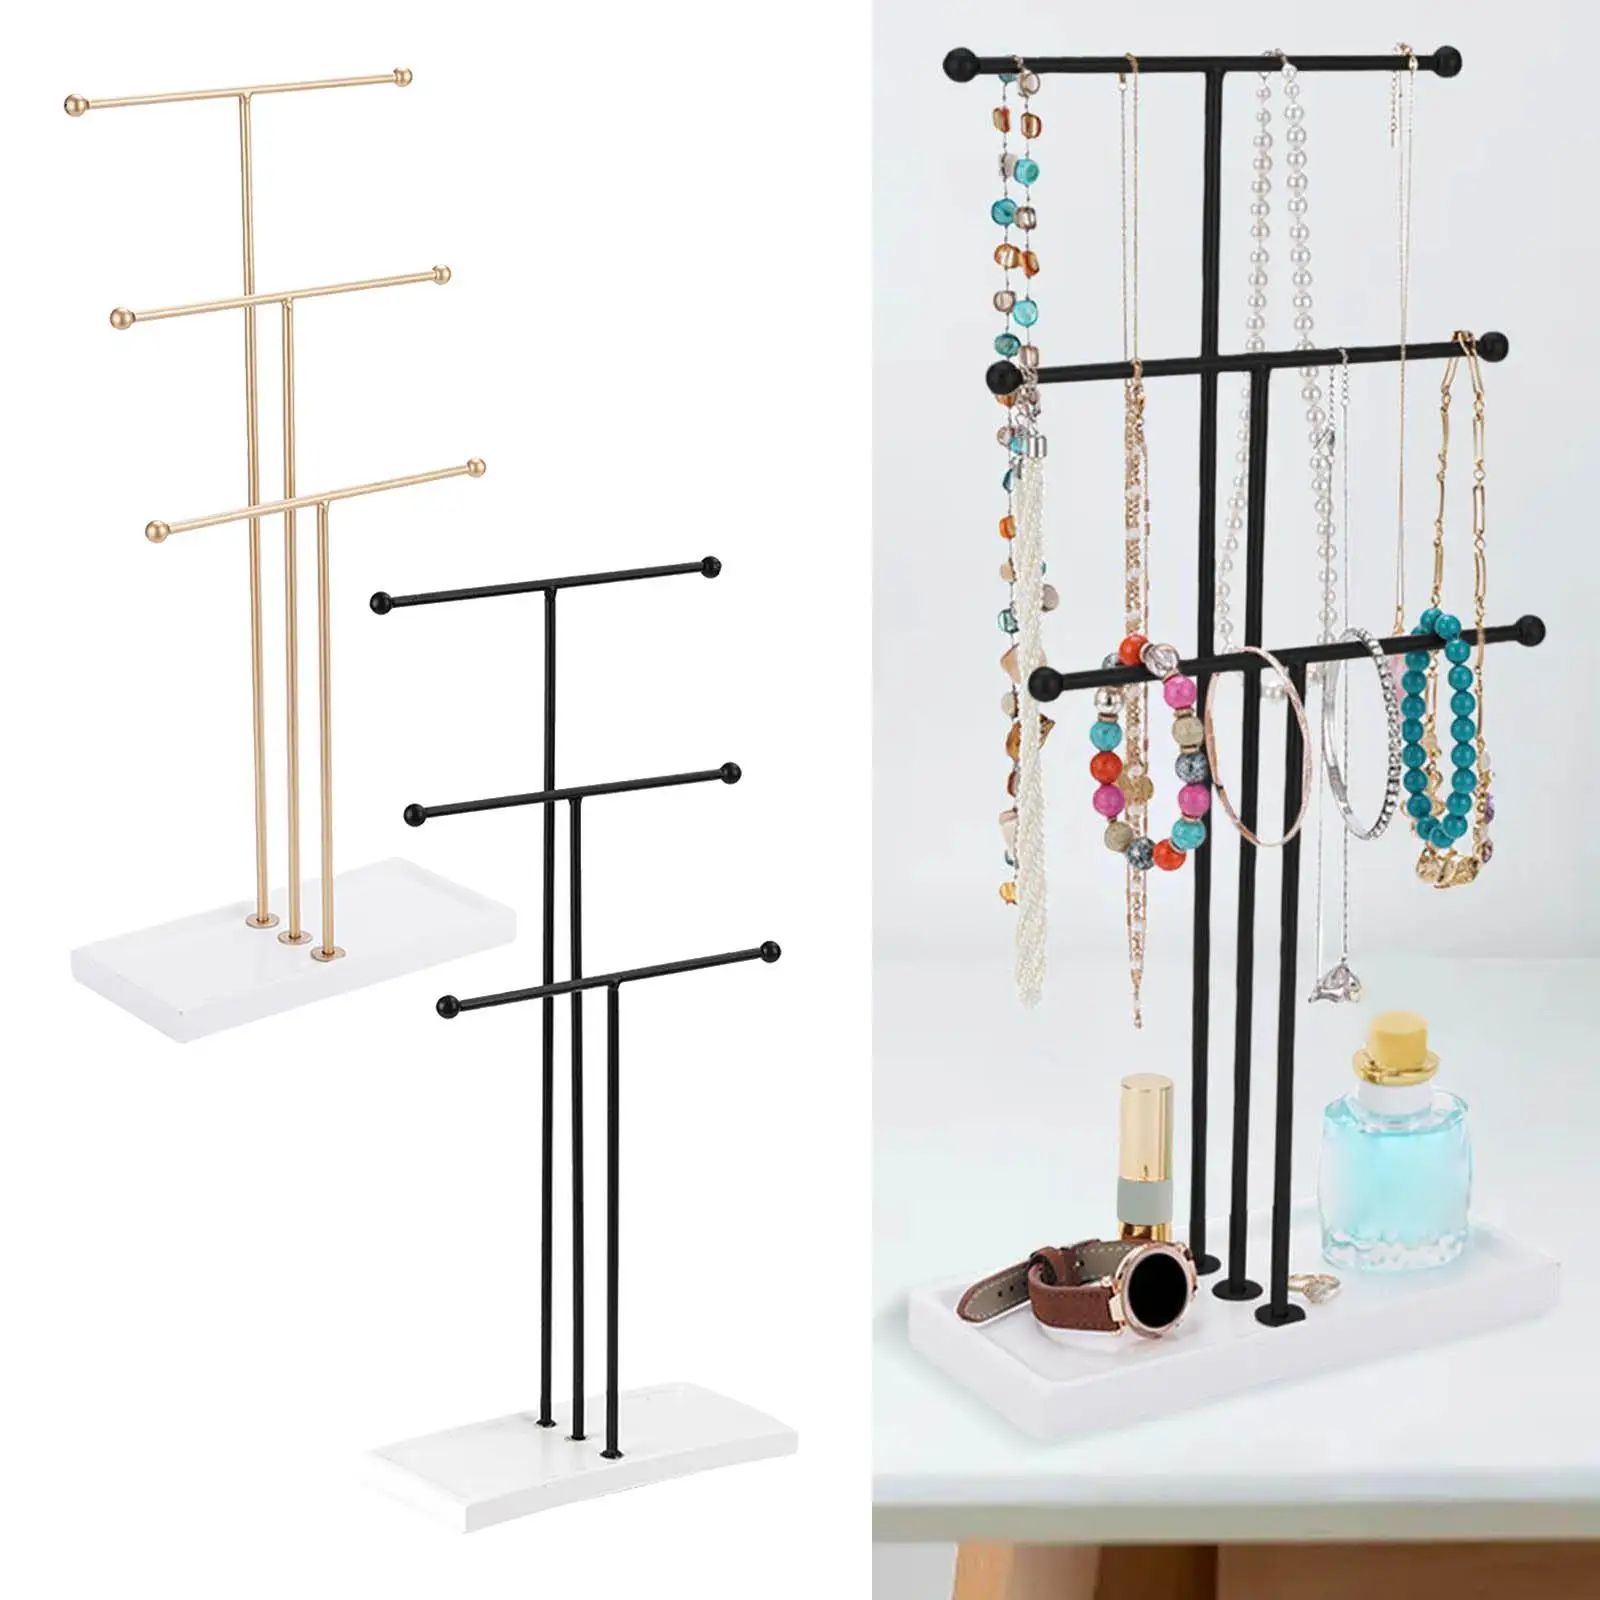 Tabletop 3 Tier Metal T Bar Bracelet Necklace Jewelry Display Tree Rack, for Displaying, Storing and Organizing Necklace Holder